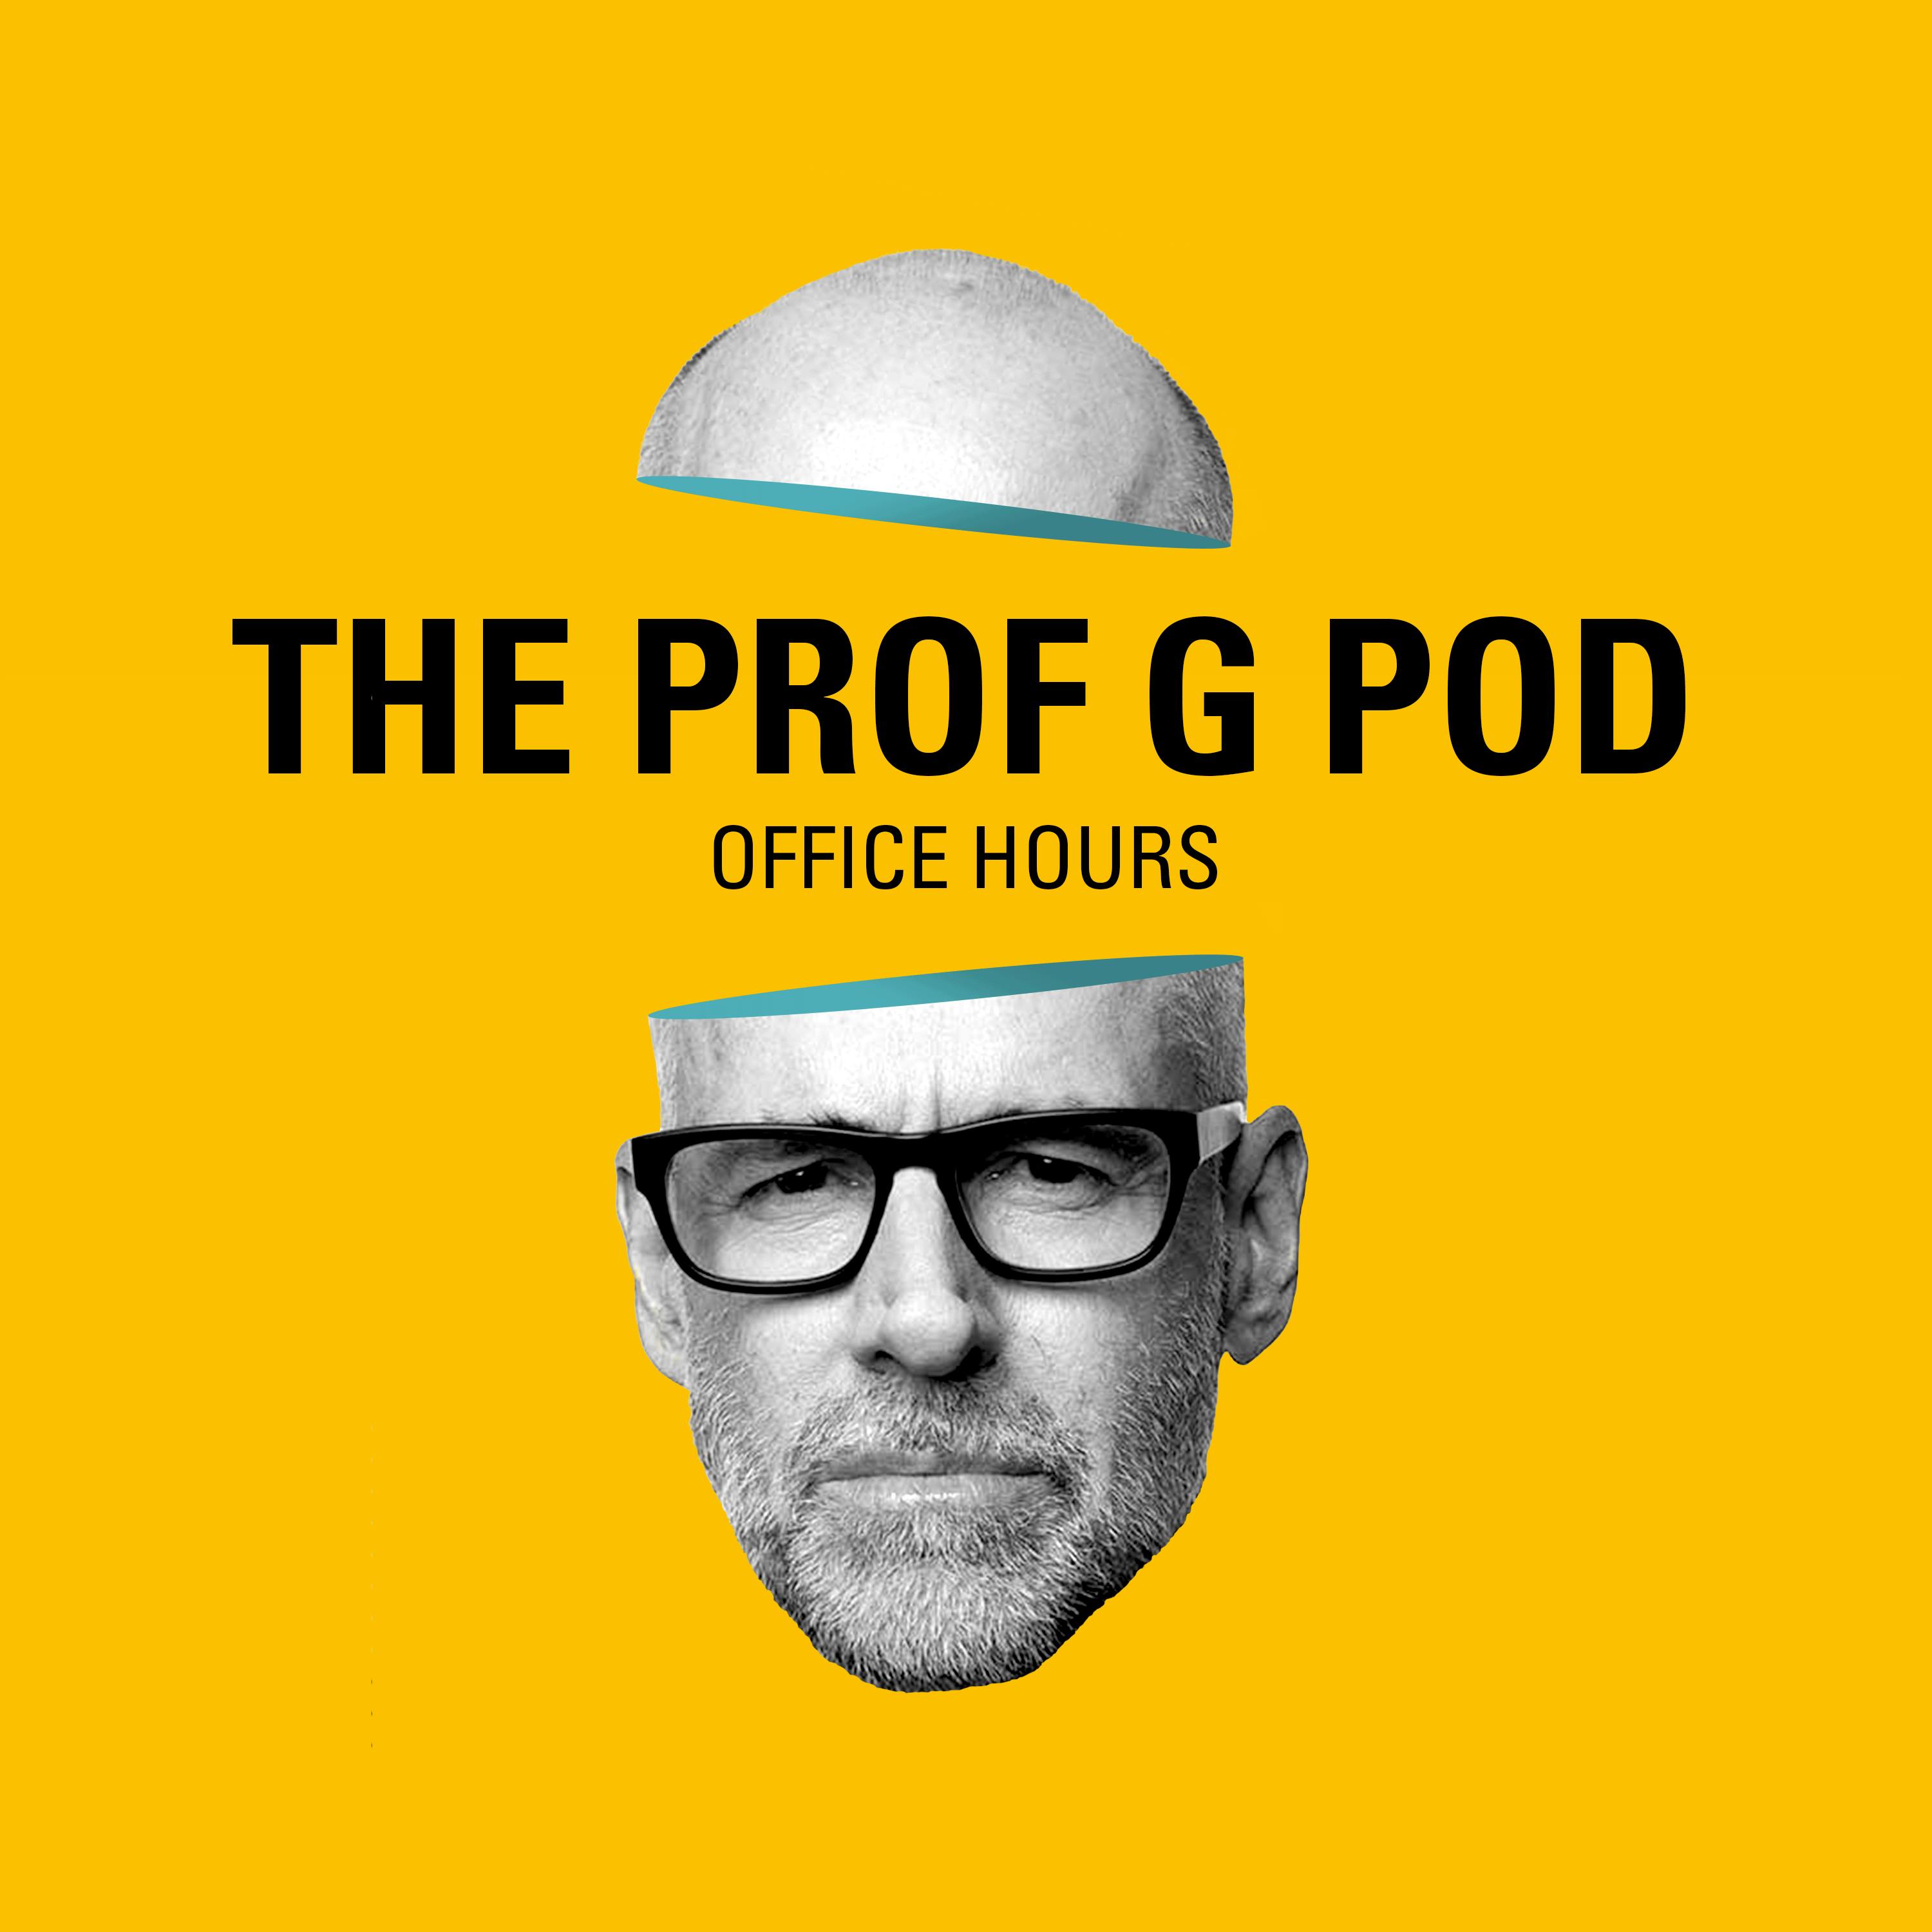 Office Hours: Allocating Your Small Business’s Revenue, Would Scott Ever Run for Public Office? and Finding Your Purpose